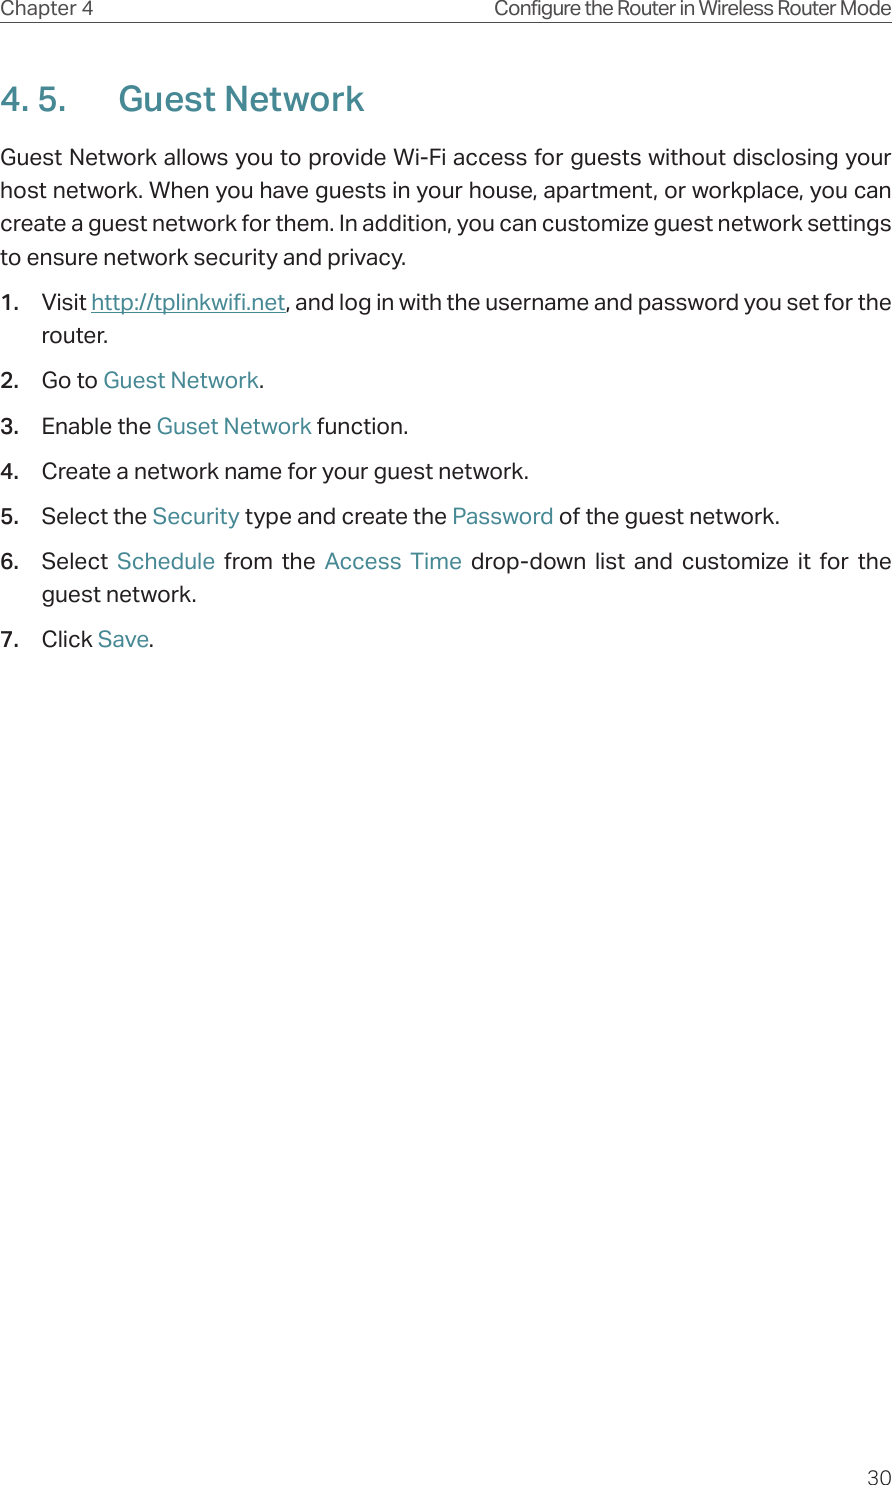 30Chapter 4 Configure the Router in Wireless Router Mode4. 5.  Guest NetworkGuest Network allows you to provide Wi-Fi access for guests without disclosing your host network. When you have guests in your house, apartment, or workplace, you can create a guest network for them. In addition, you can customize guest network settings to ensure network security and privacy.1.  Visit http://tplinkwifi.net, and log in with the username and password you set for the router.2.  Go to Guest Network.3.  Enable the Guset Network function.4.  Create a network name for your guest network.5.  Select the Security type and create the Password of the guest network.6.  Select  Schedule  from the Access Time drop-down list and customize it for the guest network.7.  Click Save.